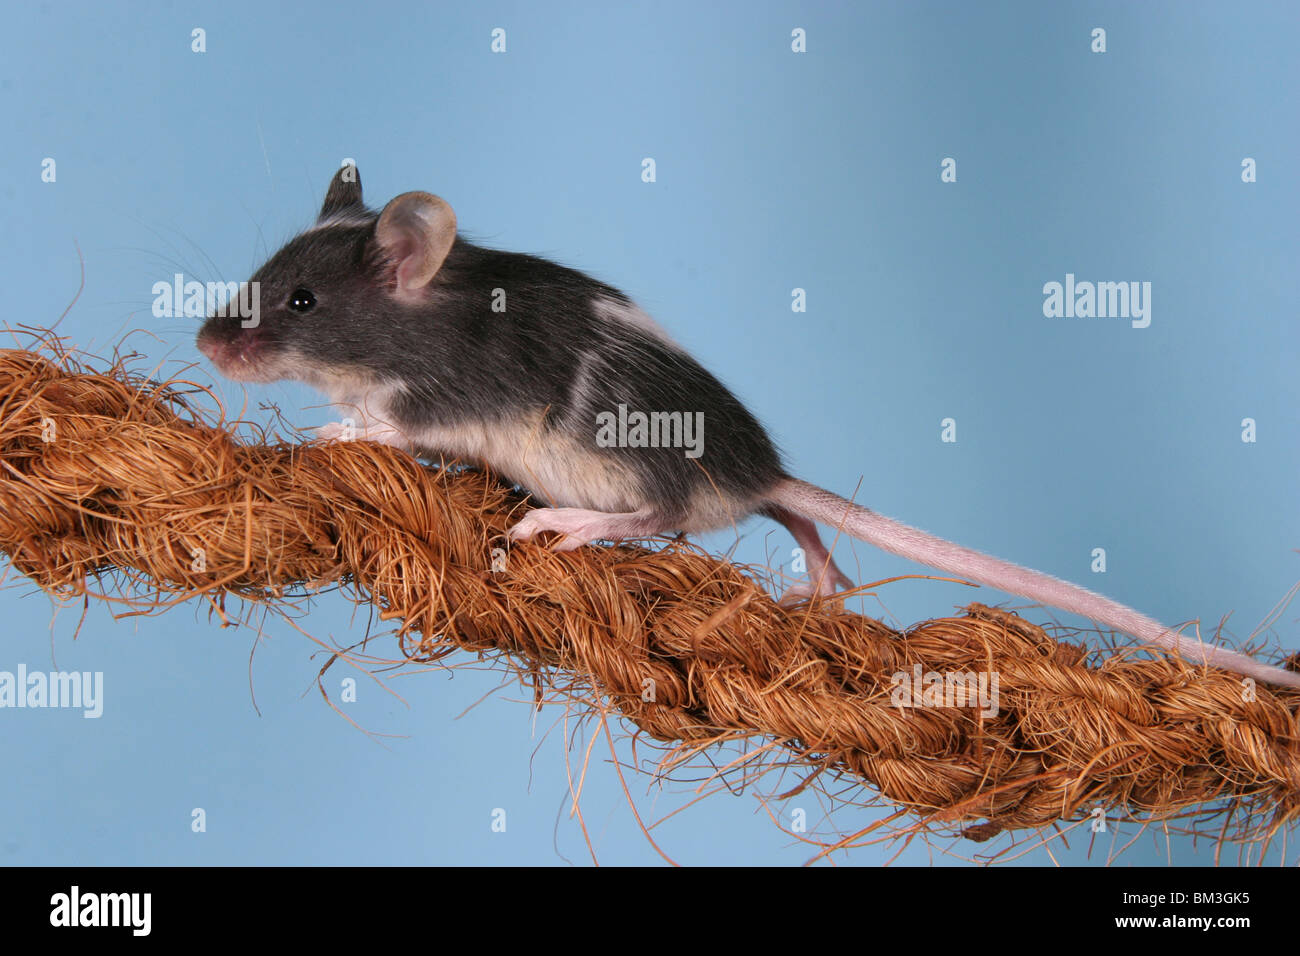 junge Farbmaus auf dem Seil / young mouse on the rope Stock Photo